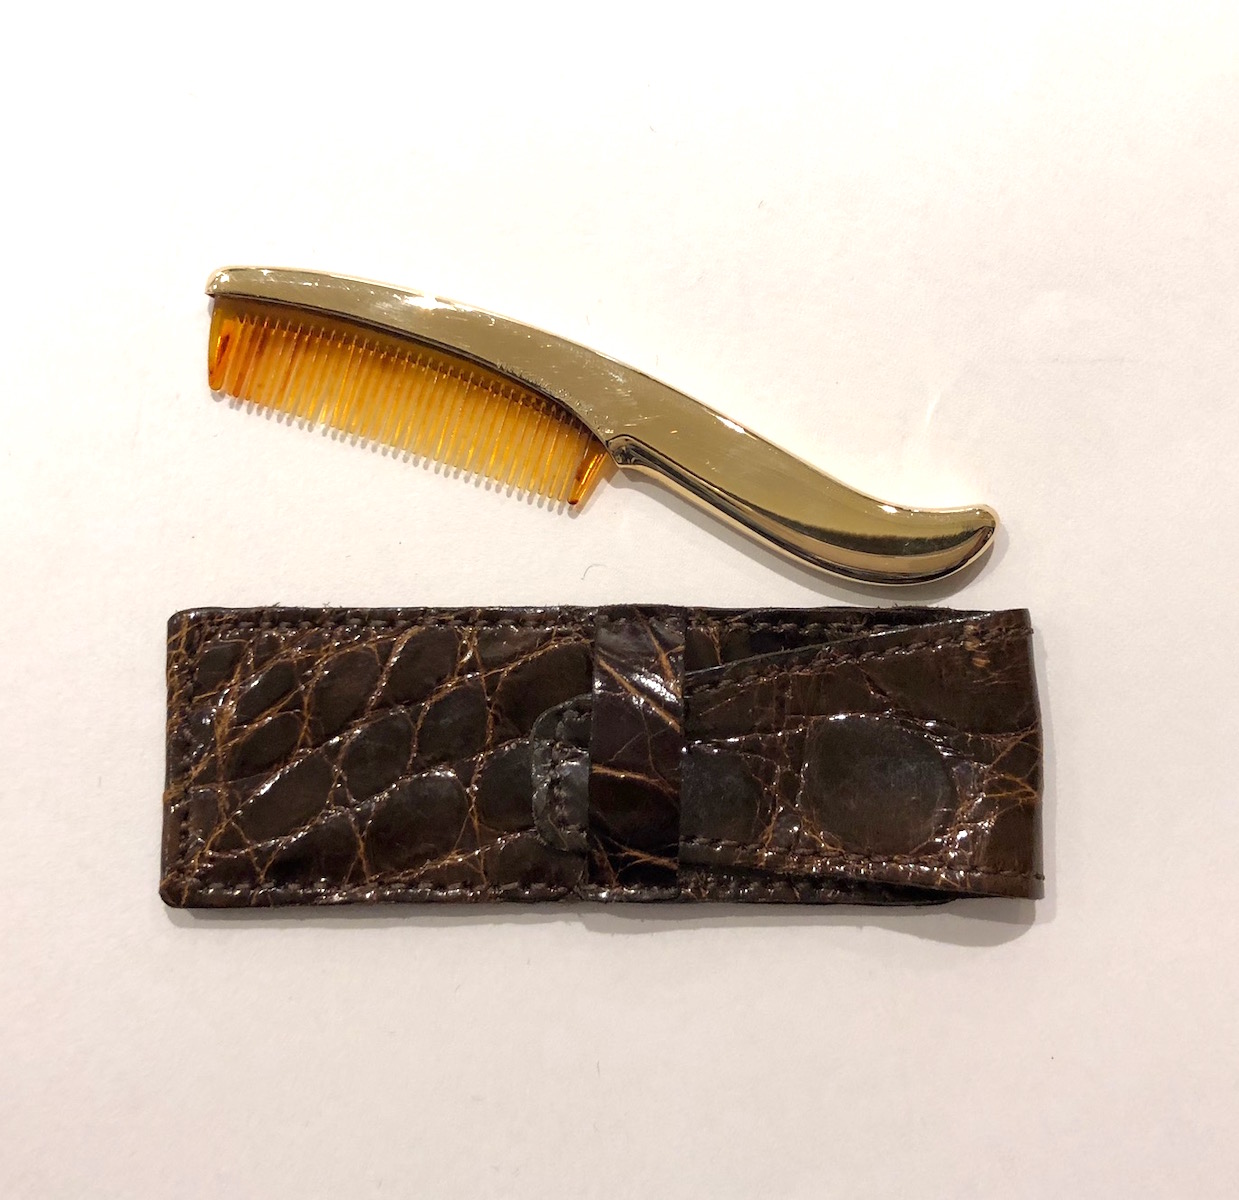 Tiffany & Co Art Deco “Mustache” comb, 14K gold in a contoured form with the original tortoise shell comb and brown alligator slip case, signed: Tiffany & Co. 14K, square bowtie mark (possible maker’s mark), c. 1930’s